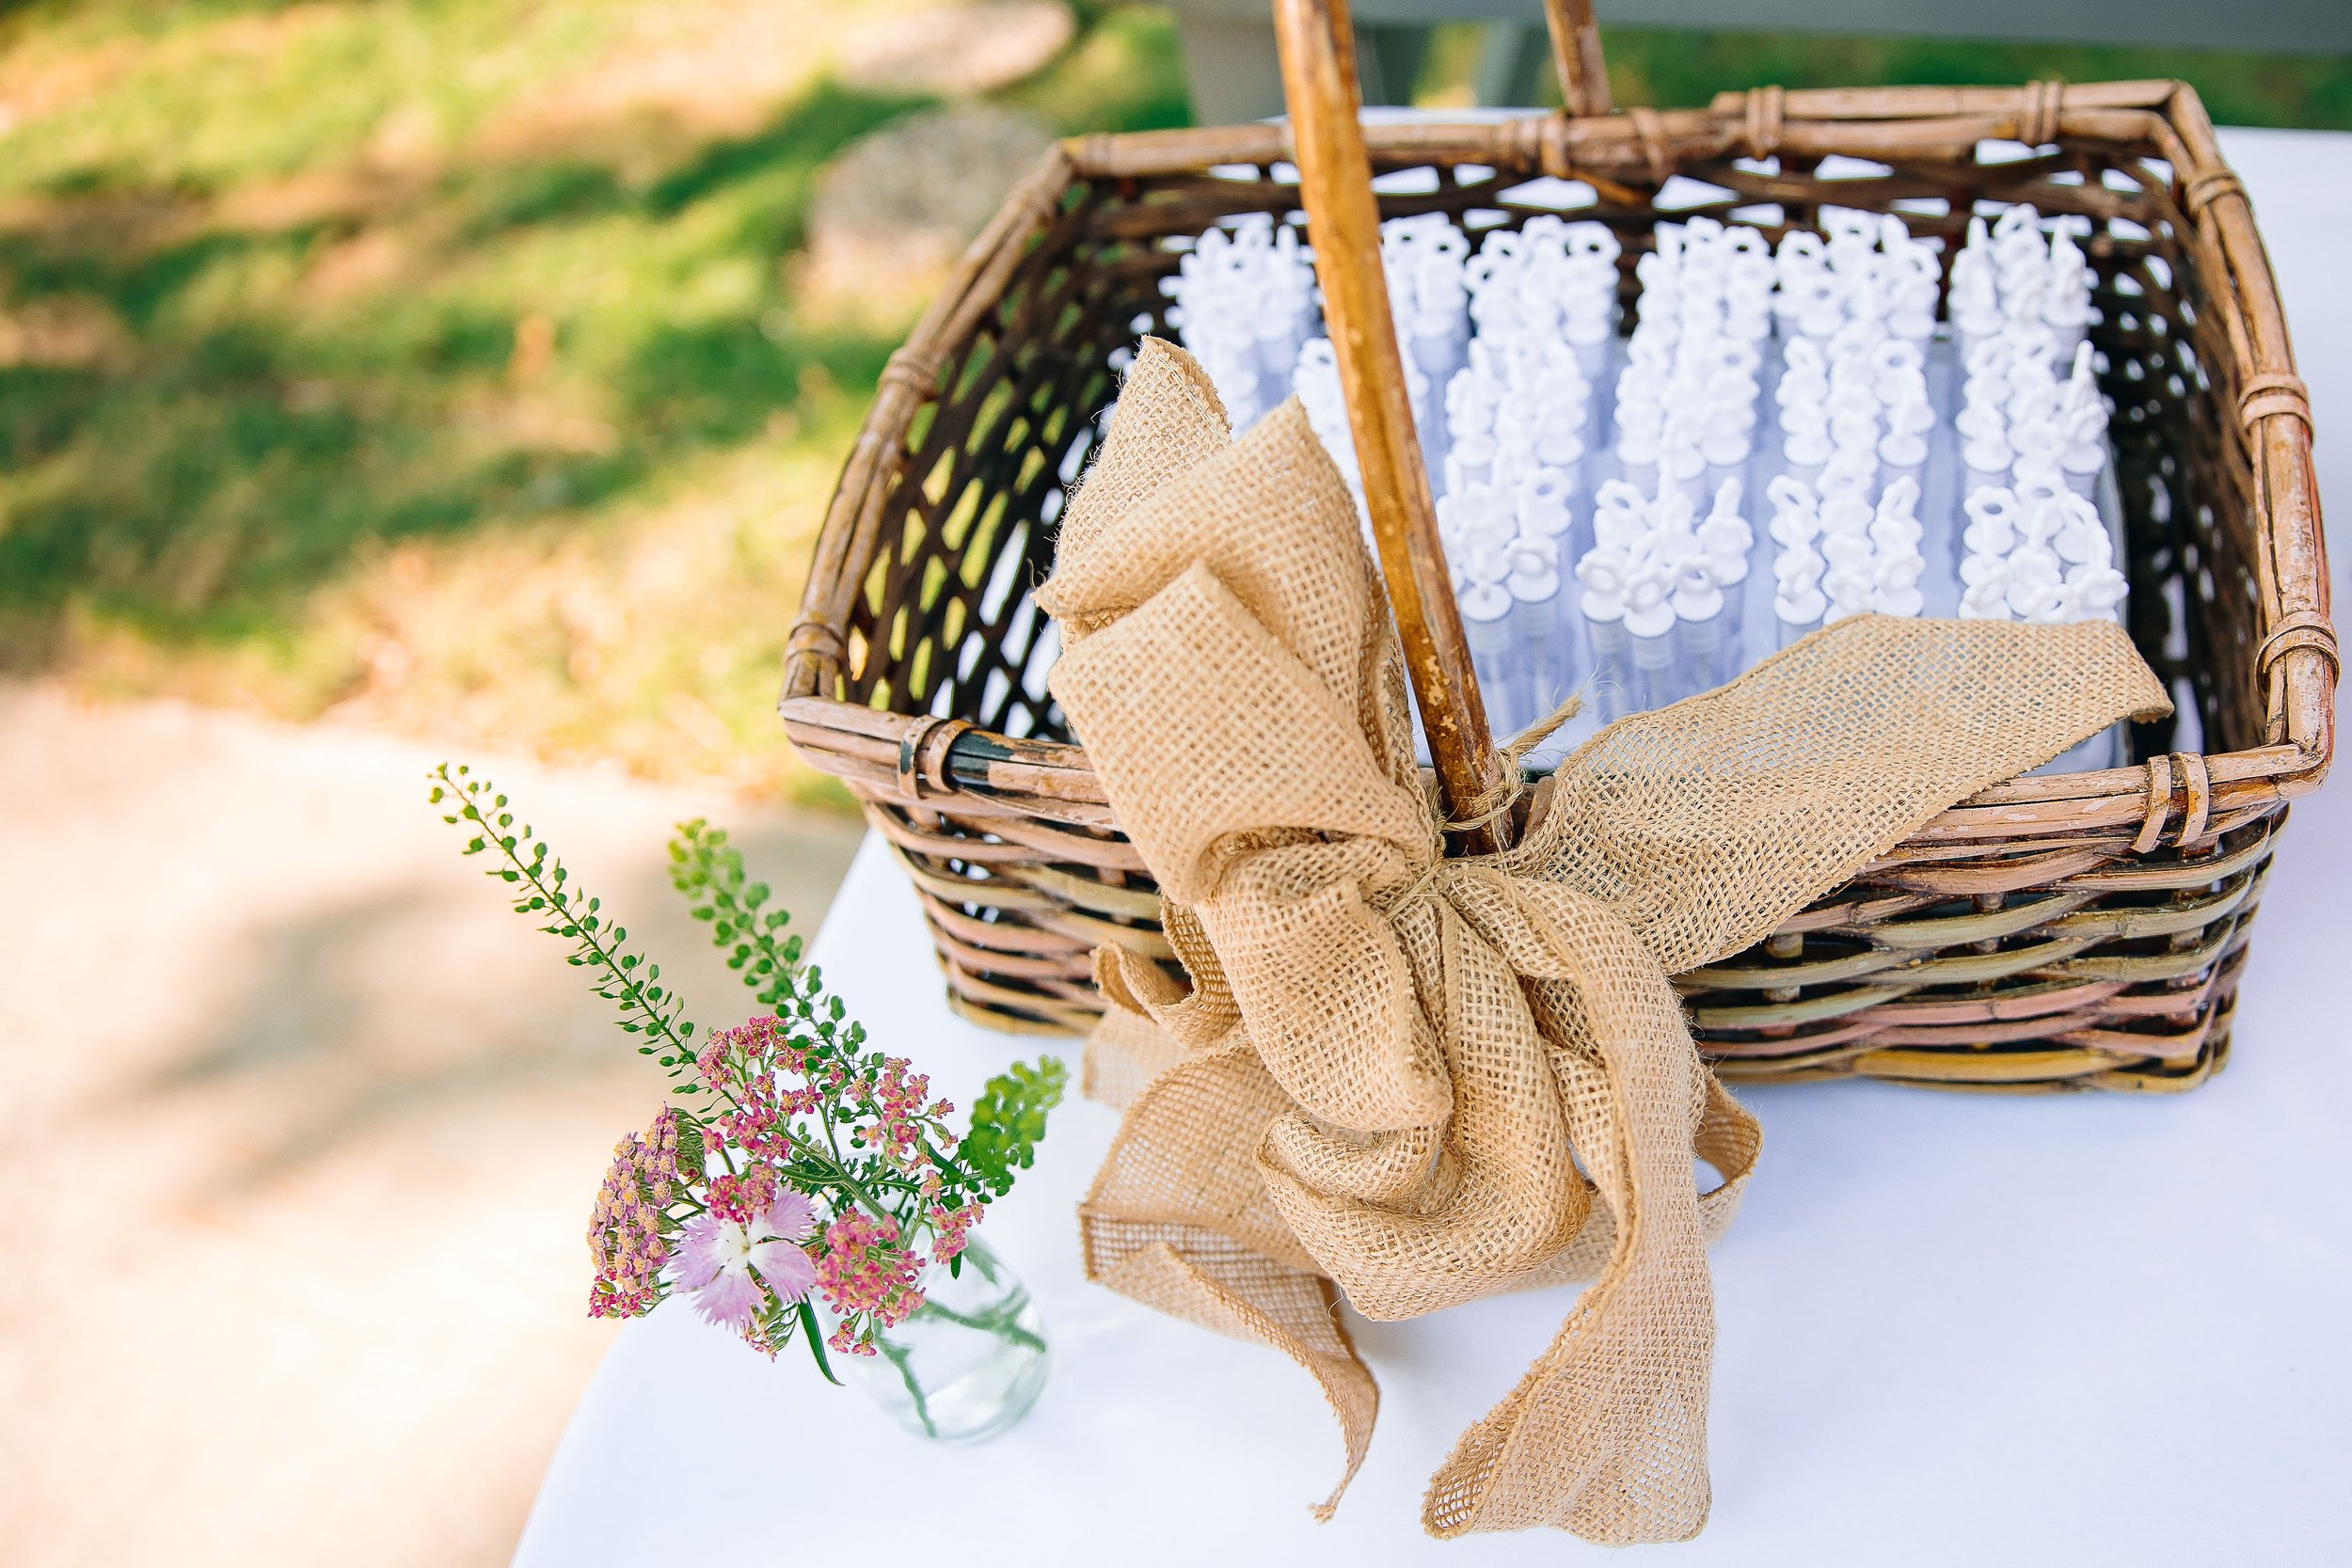 Bud vases and wicker basket of bubbles with burlap ribbon bow for an outdoor backyard wedding. Flowers by Plano, TX florist Terra Cotta Blooms. Photo by Radiant Film &amp; Photo.